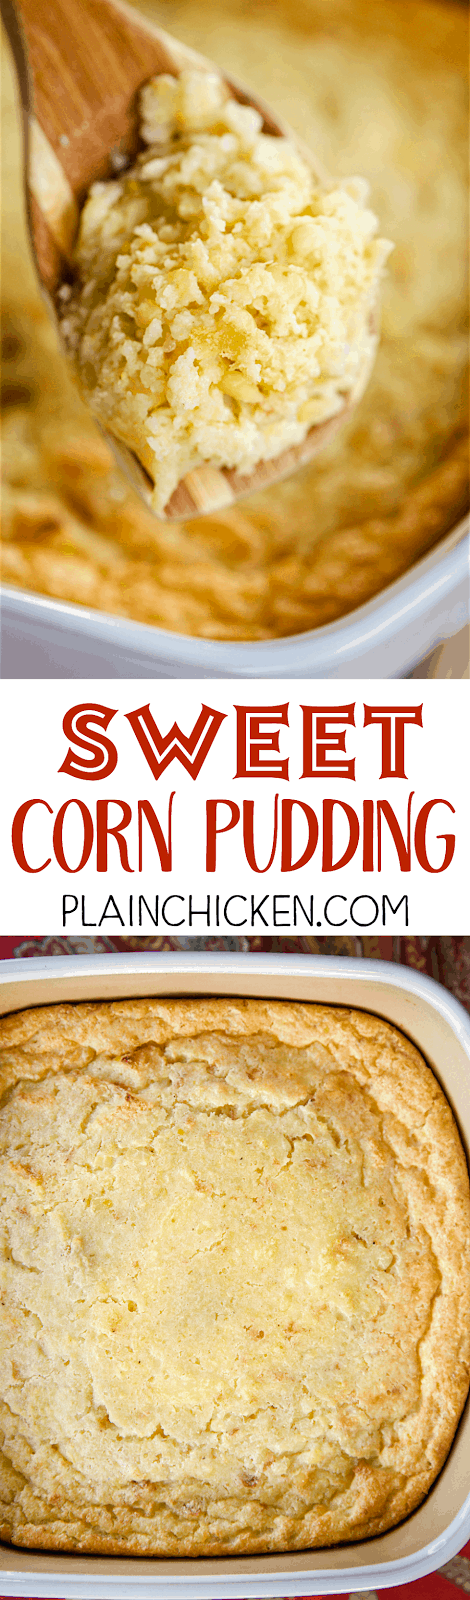 Sweet Corn Pudding - a family favorite! Fresh bread crumbs, cornmeal mix, sugar, eggs, milk, half-and-half, butter and frozen cream-style corn. This tastes AMAZING!! Great anytime of year. We love it with grilled chicken, pork chops, steak and BBQ. It is the perfect side dish for the holidays too!